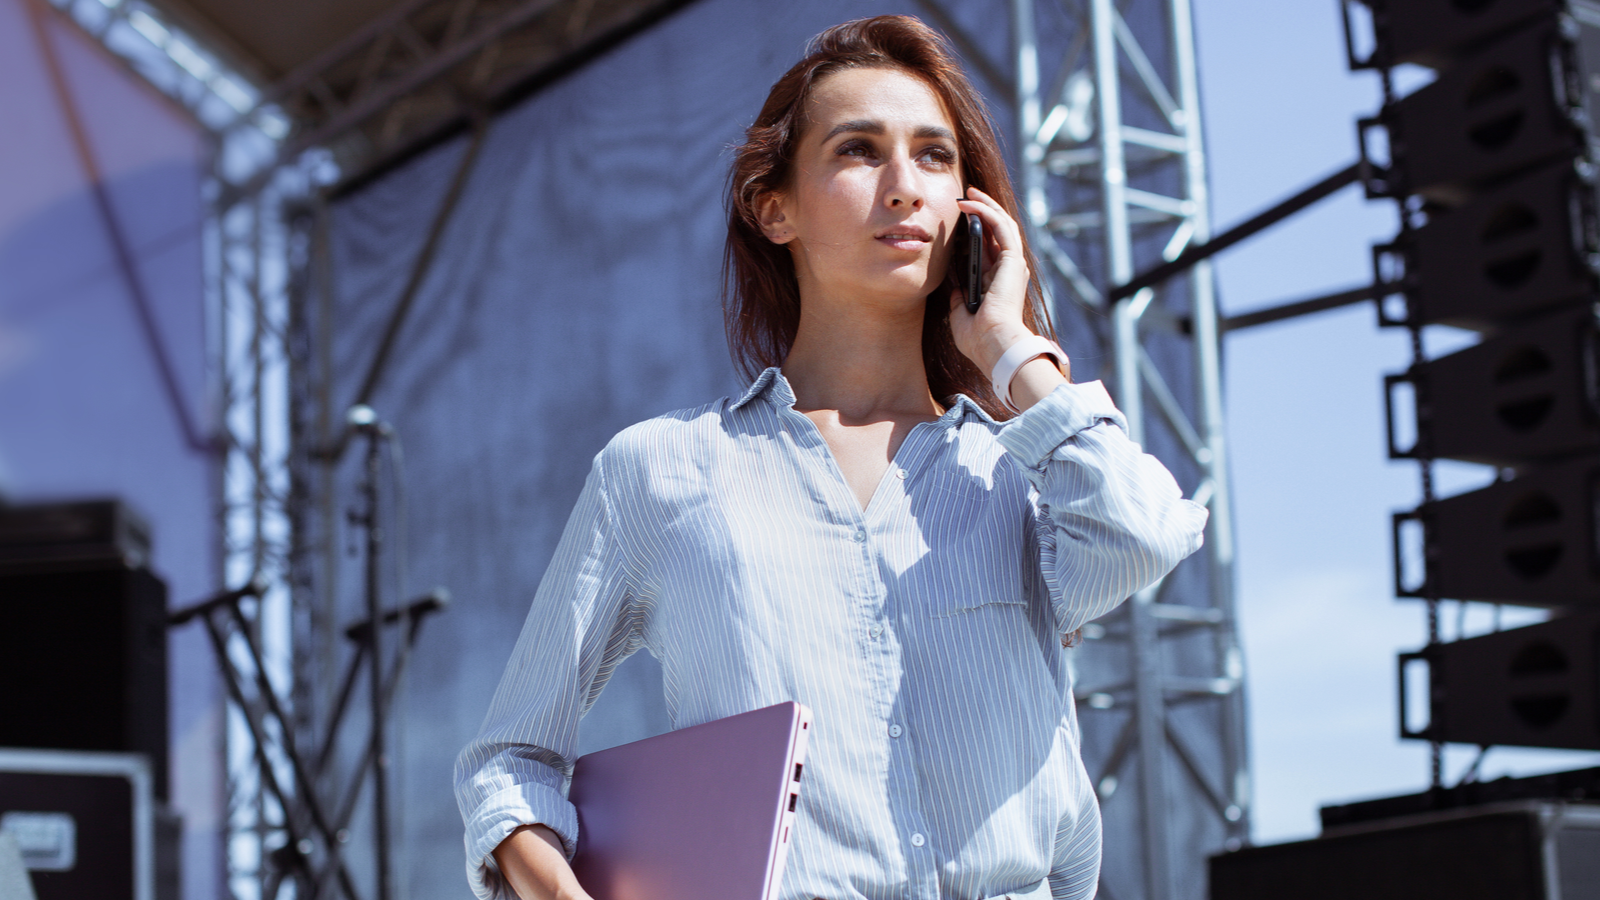 You woman standing in front of a stage speaking on a phone at a open air live event feature